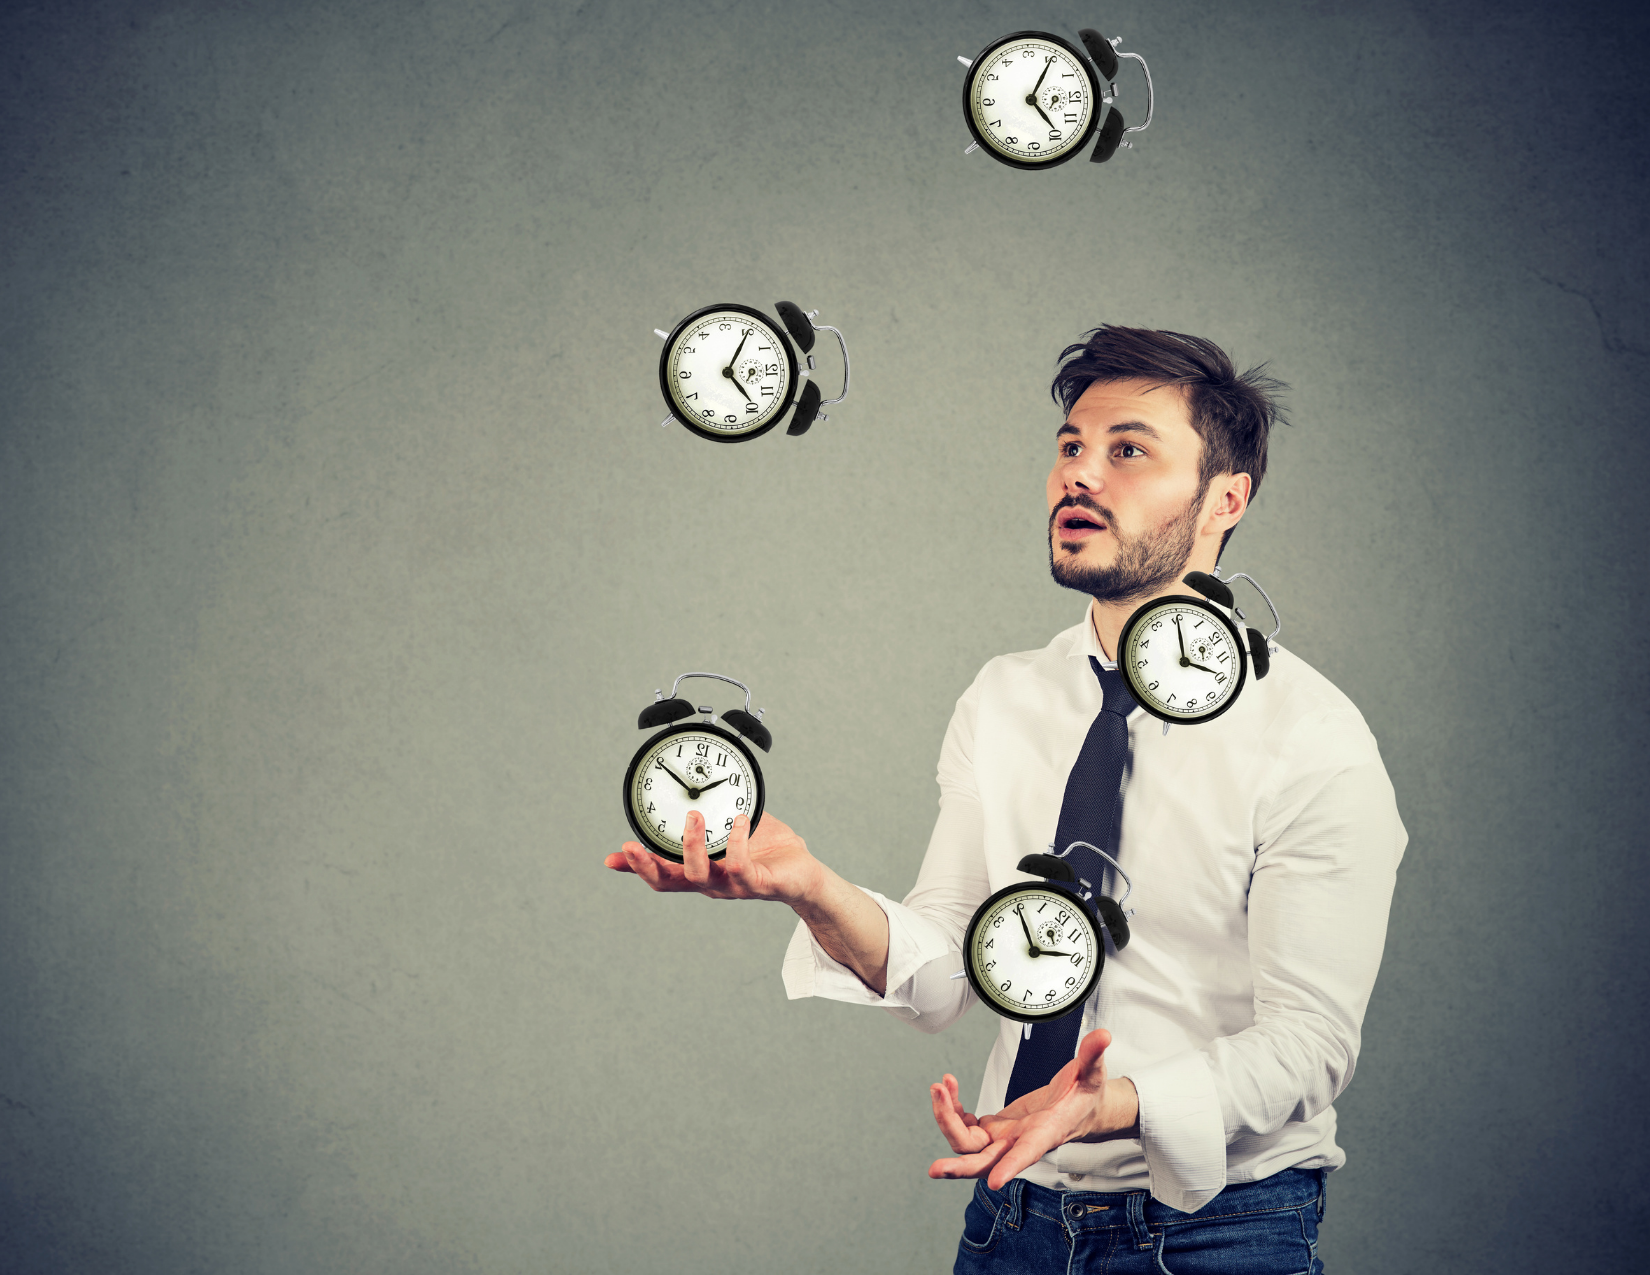 Man juggling clocks; How to do well on the MCAT